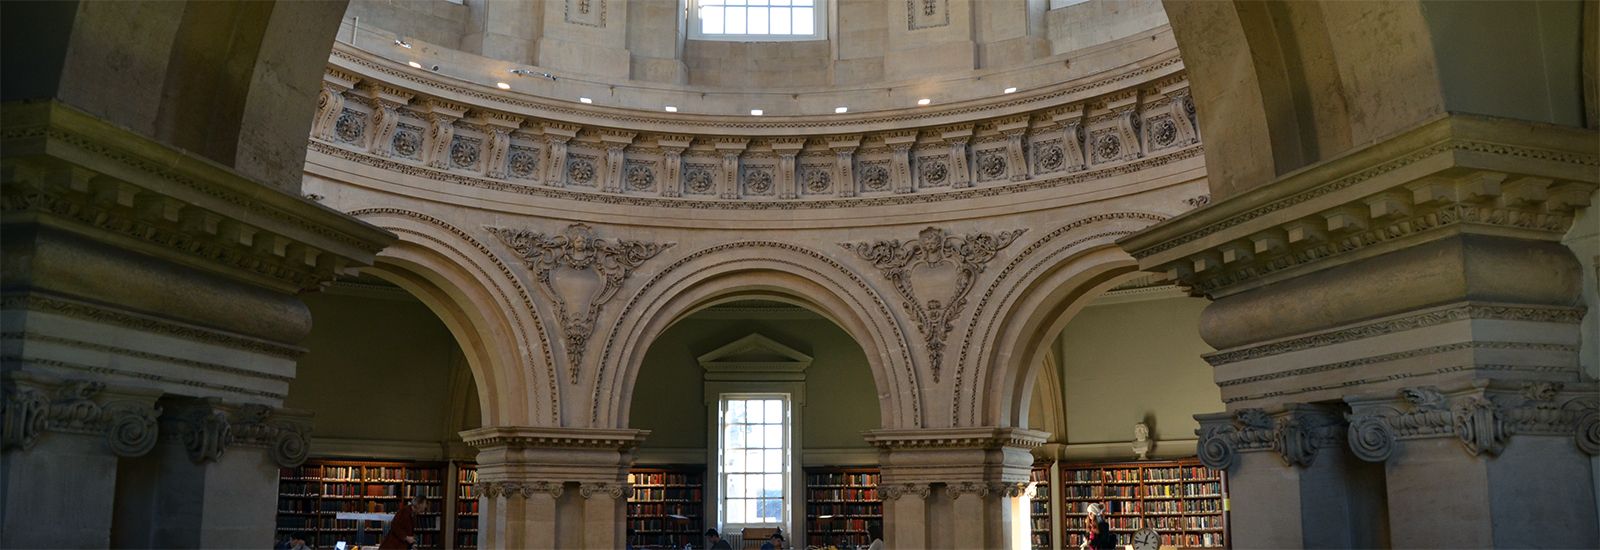 Interior of the first floor and dome of the Radcliffe Camera library